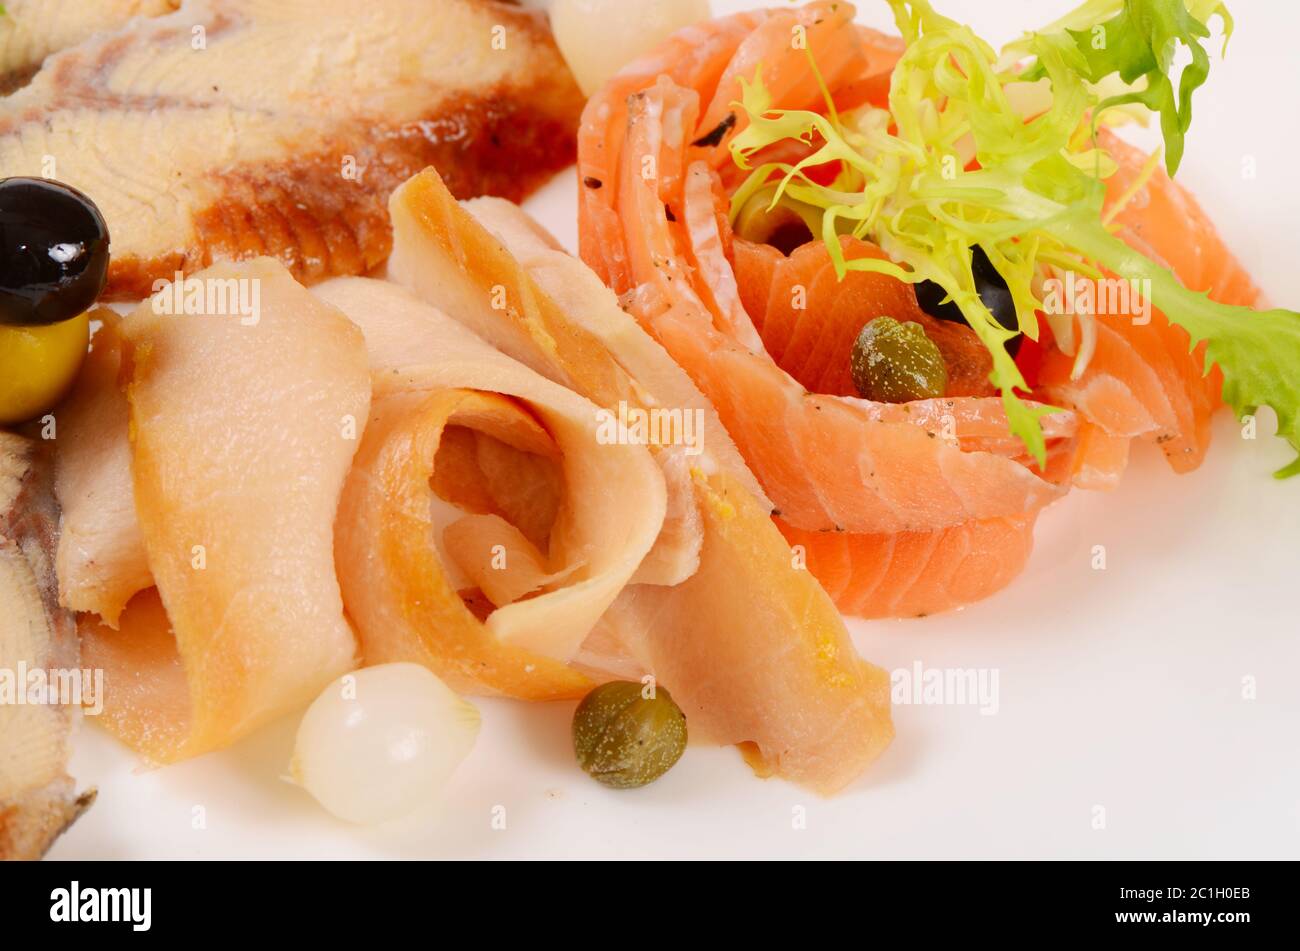 Cutting different fish in the restaurant Stock Photo